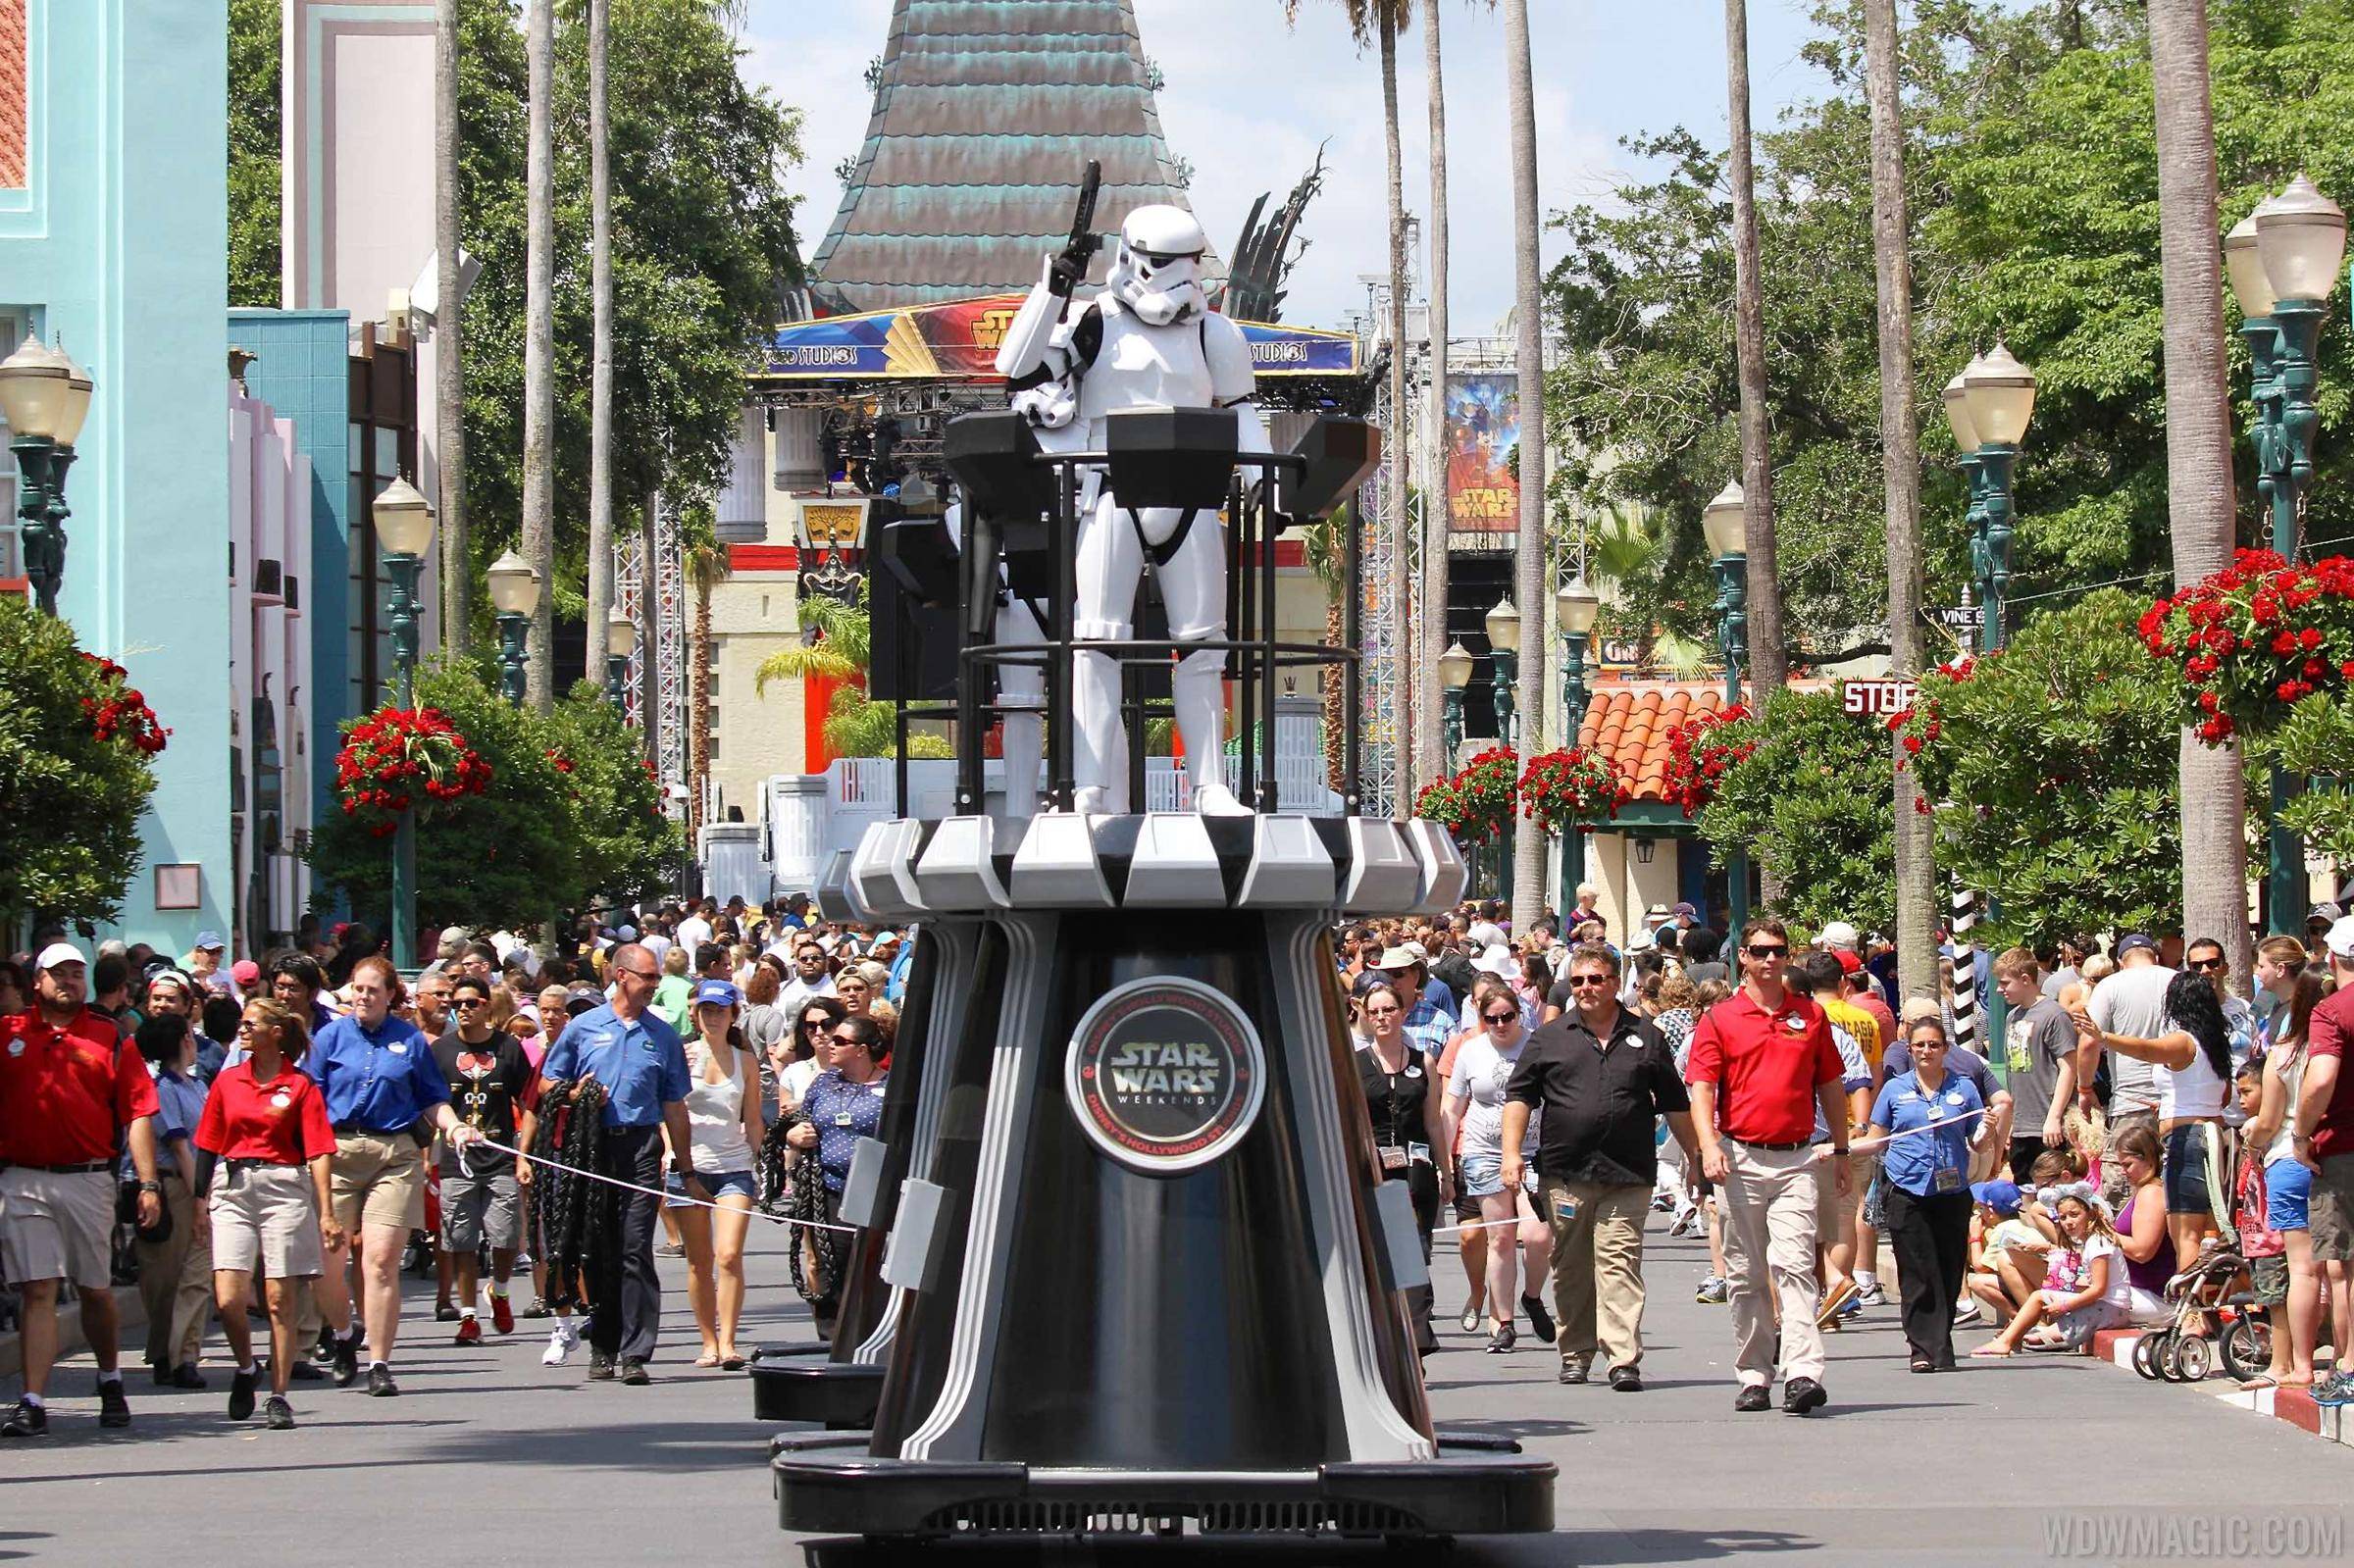 New Star Wars live stage show 'Star Wars - A Galaxy Far, Far Away' coming to Disney's Hollywood Studios this Spring